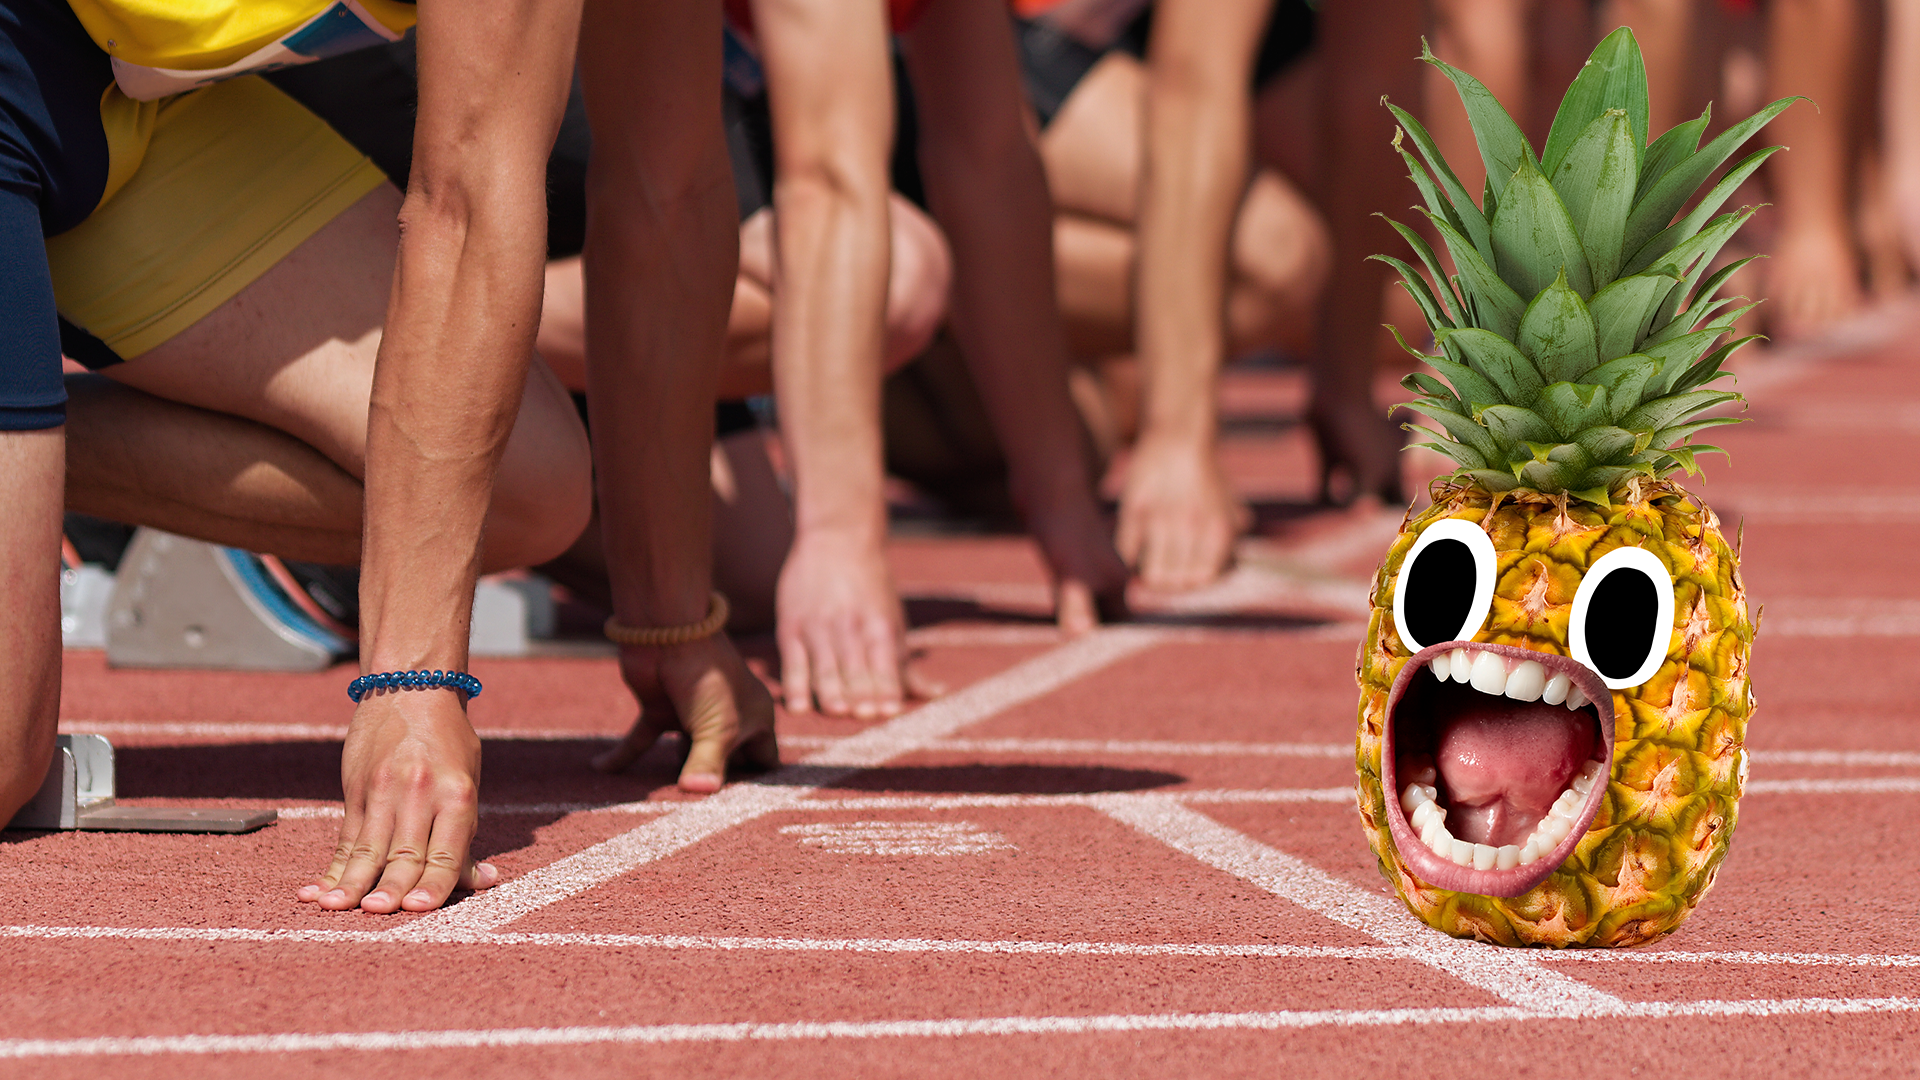 Runners at start line and screaming pineapple